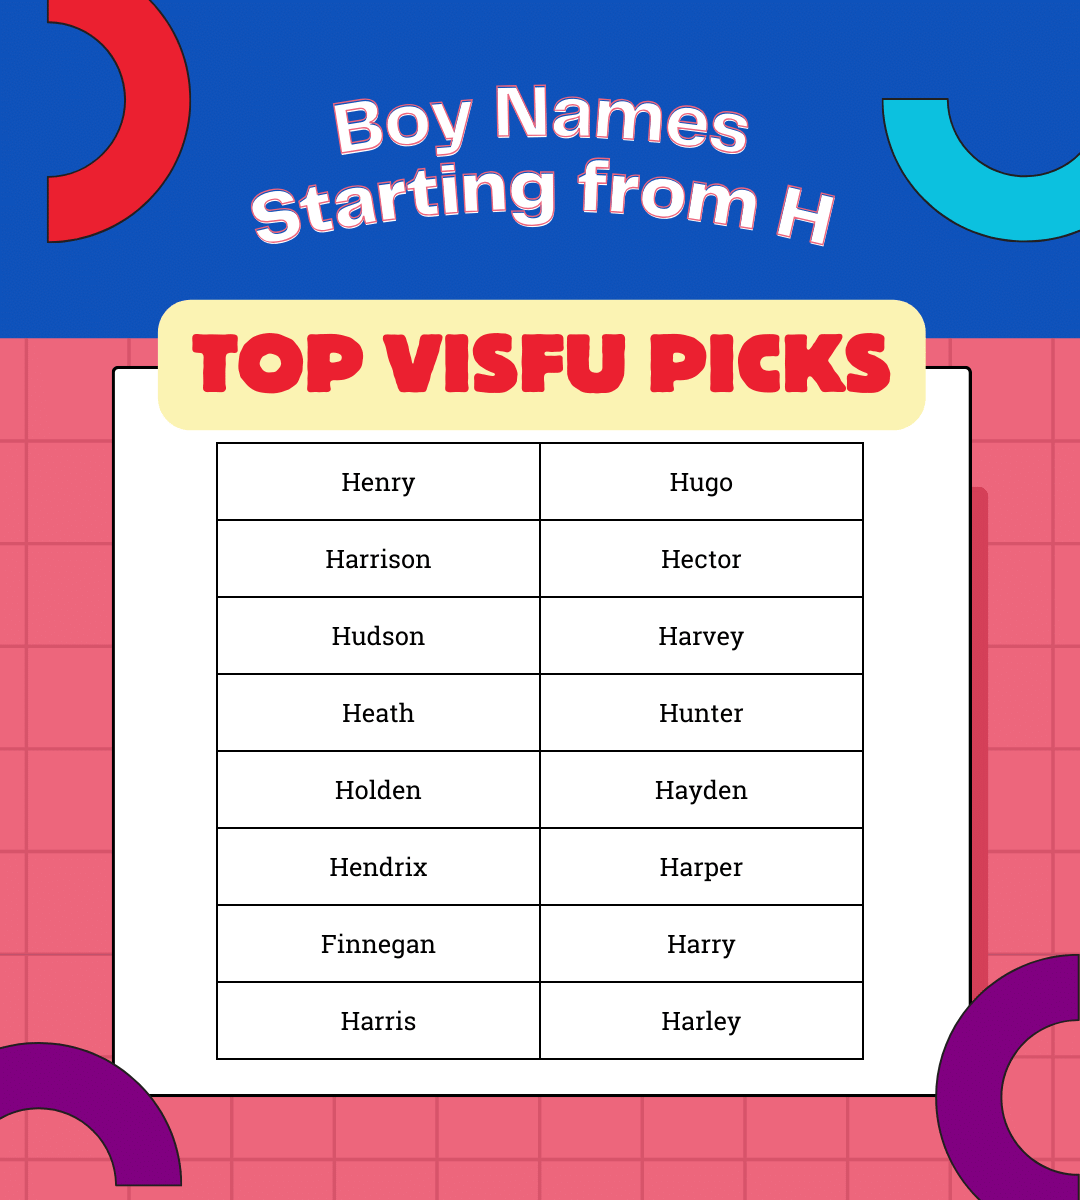 Boy names starting from H